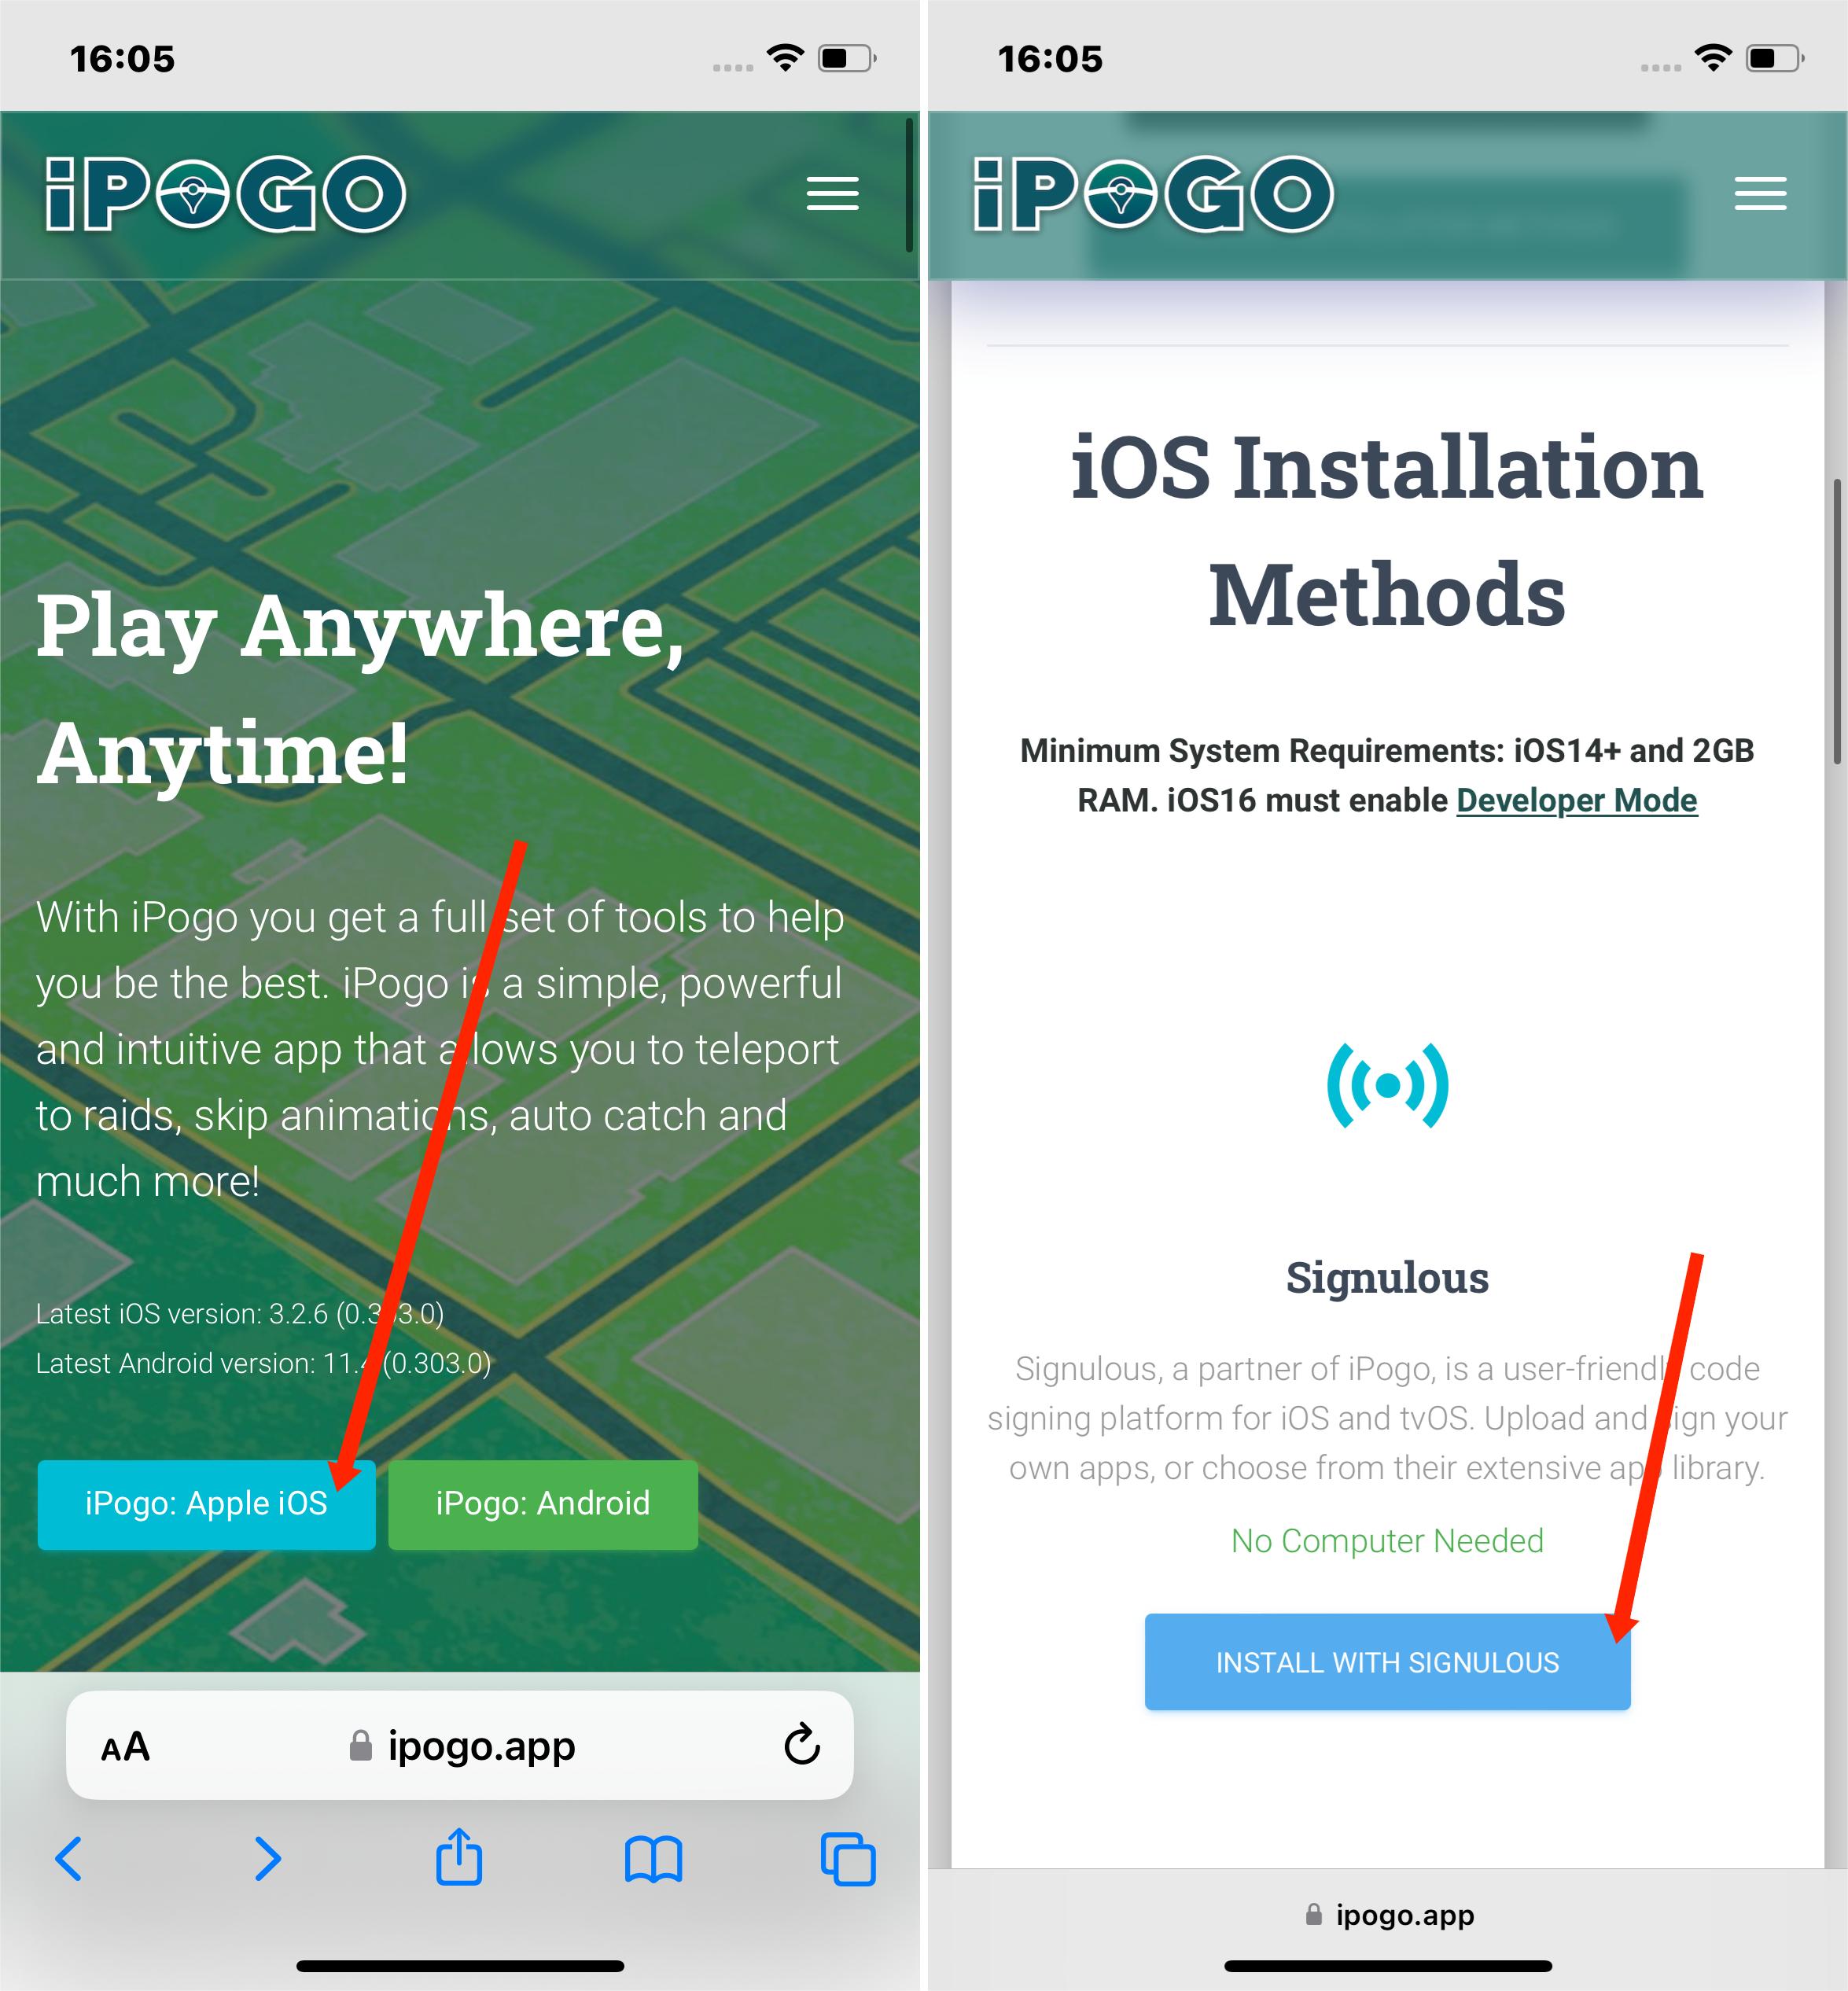 iPogo Apple Ios Install with Signulous